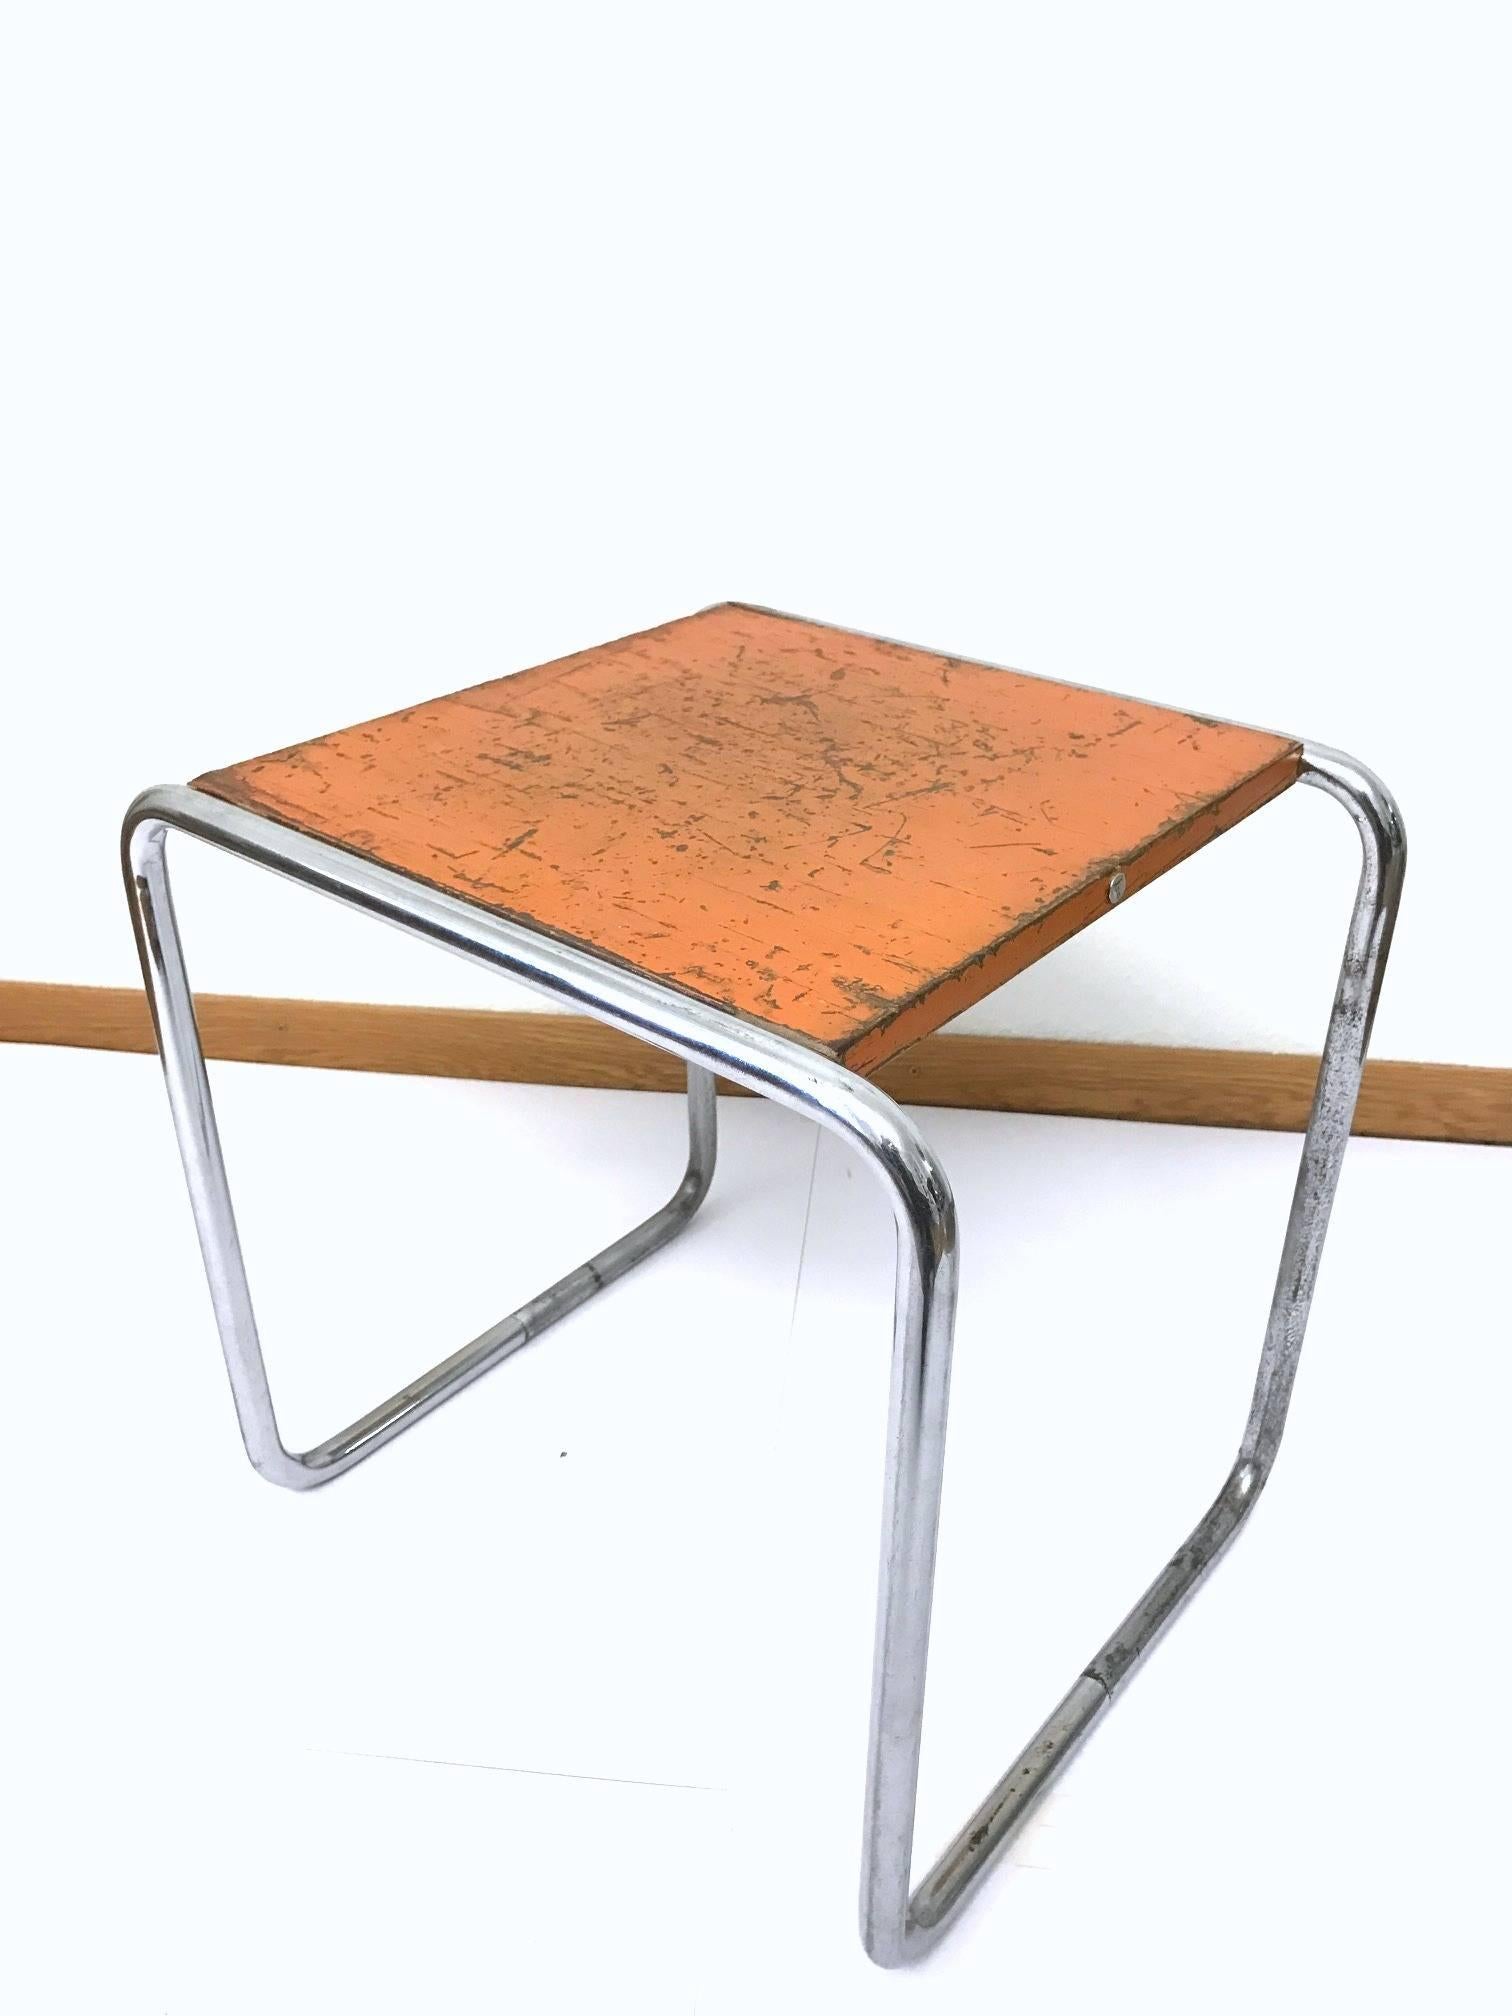 Very rare orange B9 table, designed by Marcel Breuer. This table is original of the period, 1930. The condition is completely original it features the 